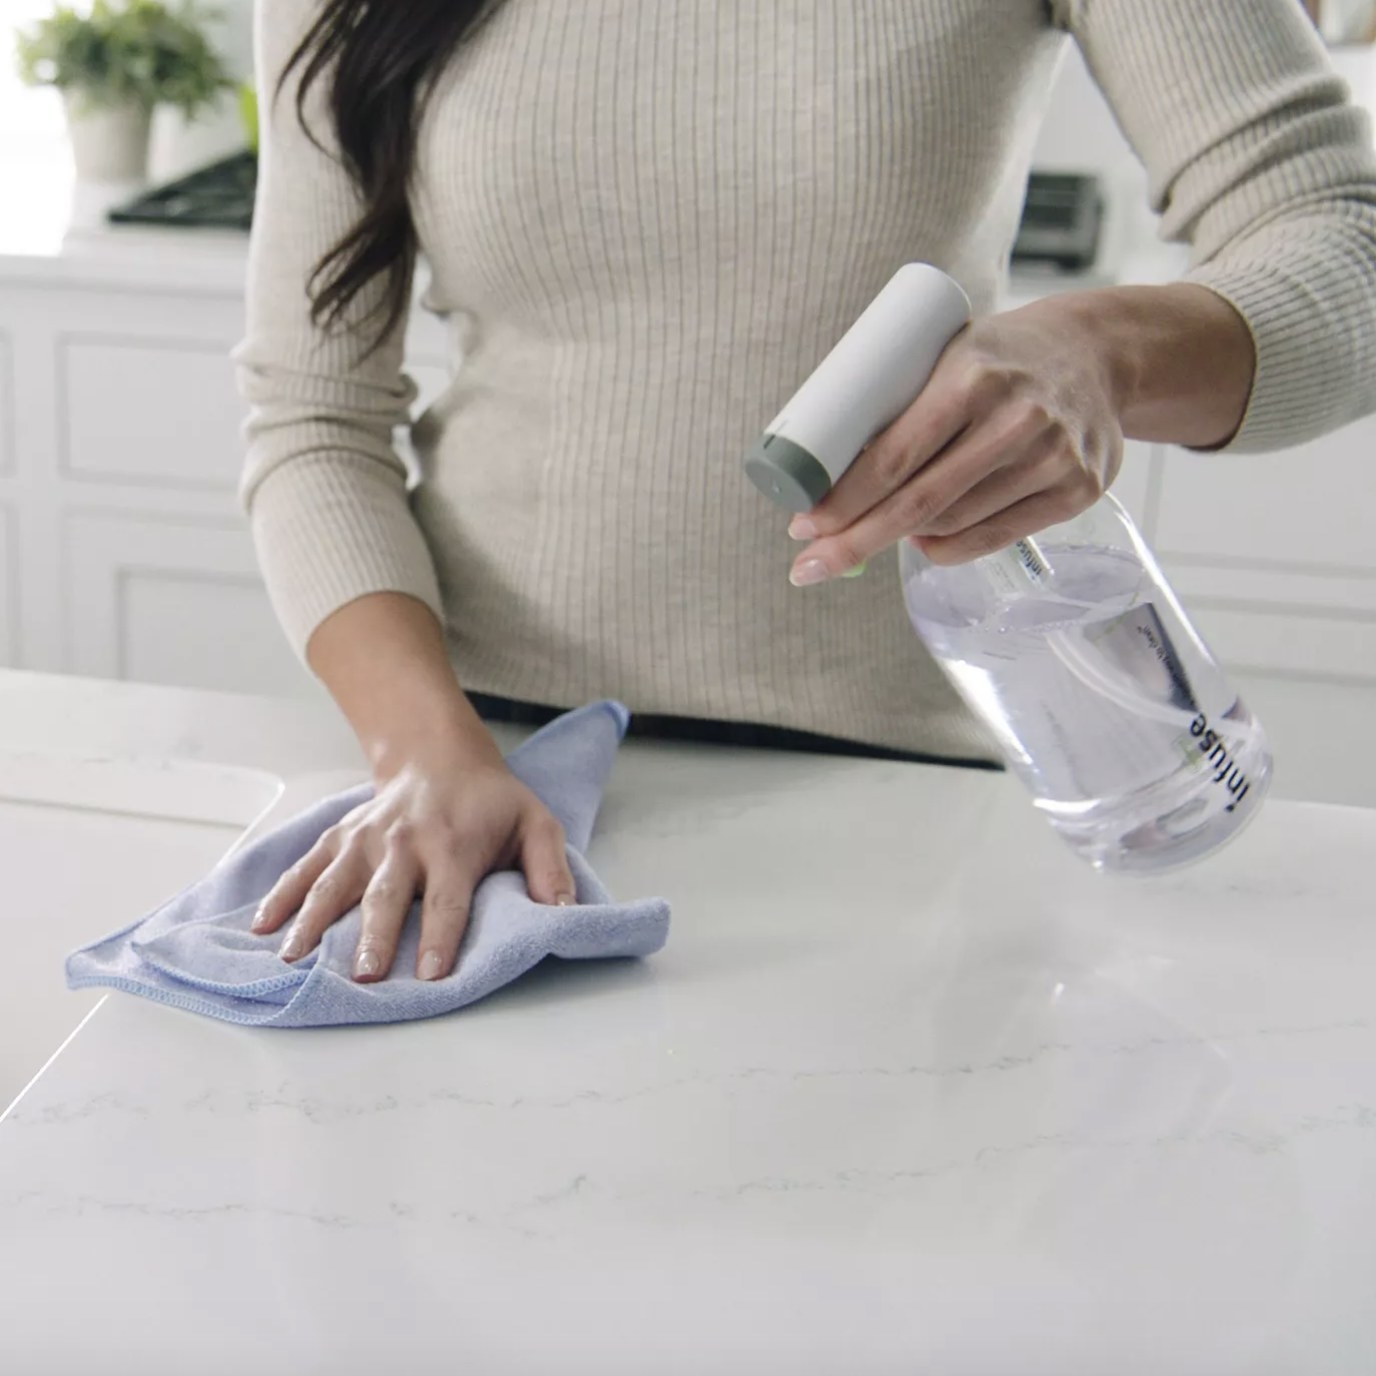 An adult is using the clear spray bottle that says &quot;infuse&quot; and has a white nozzle with a grey circular edge to wipe down a marble countertop